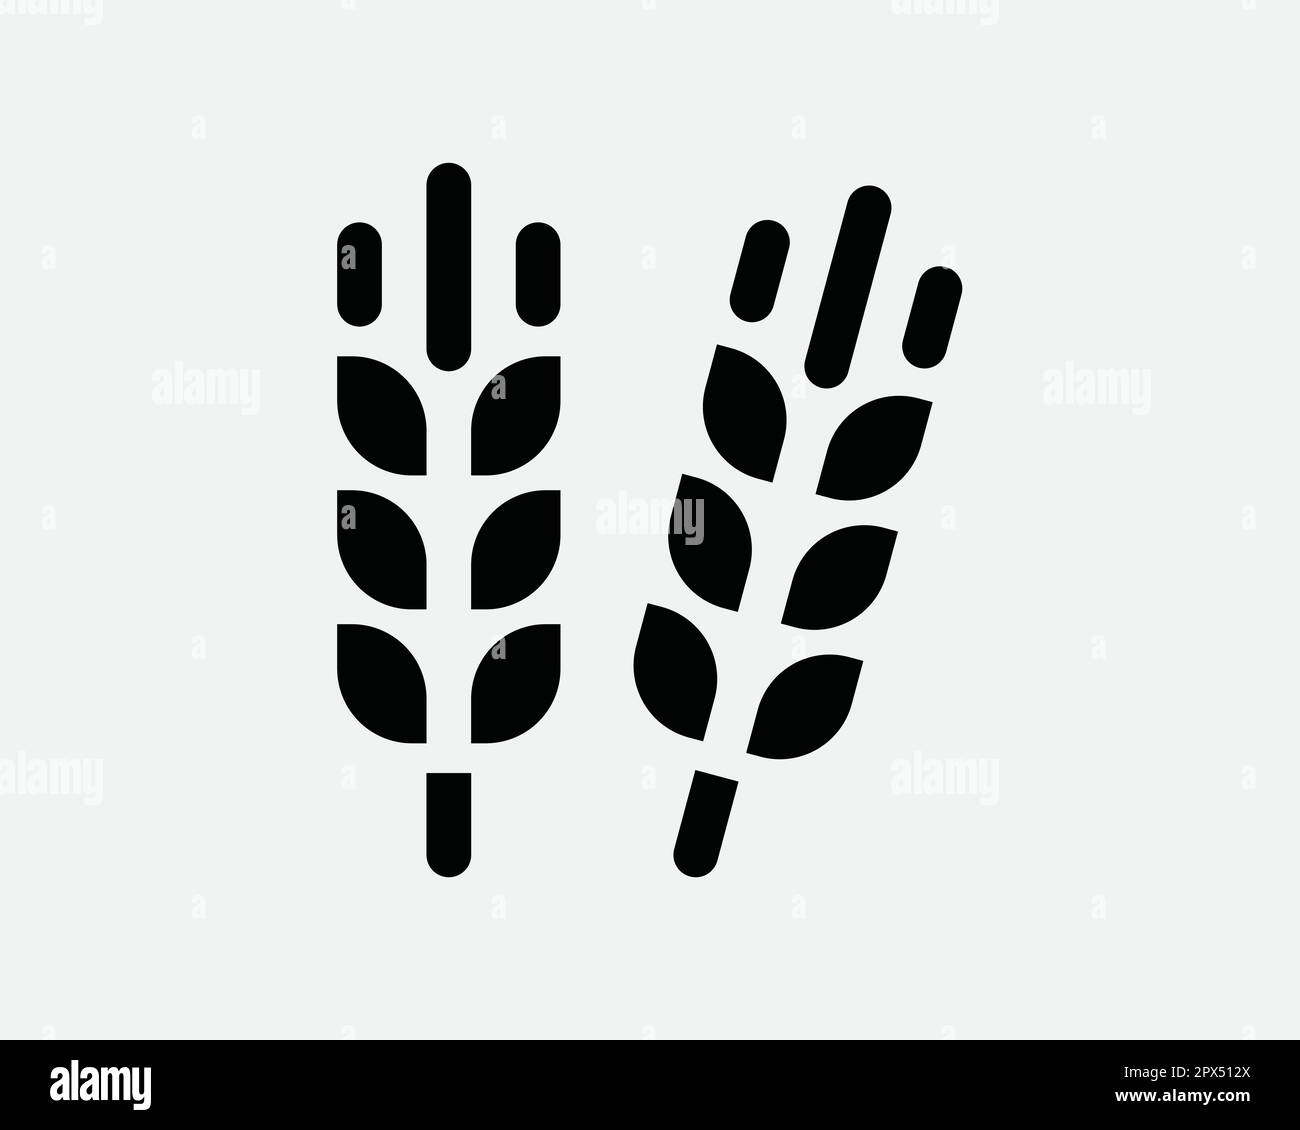 Wheat Rye Barley Grain Seed Plant Harvest Cereal Organic Healthy Crop Black and White Icon Sign Symbol Vector Artwork Clipart Illustration Stock Vector